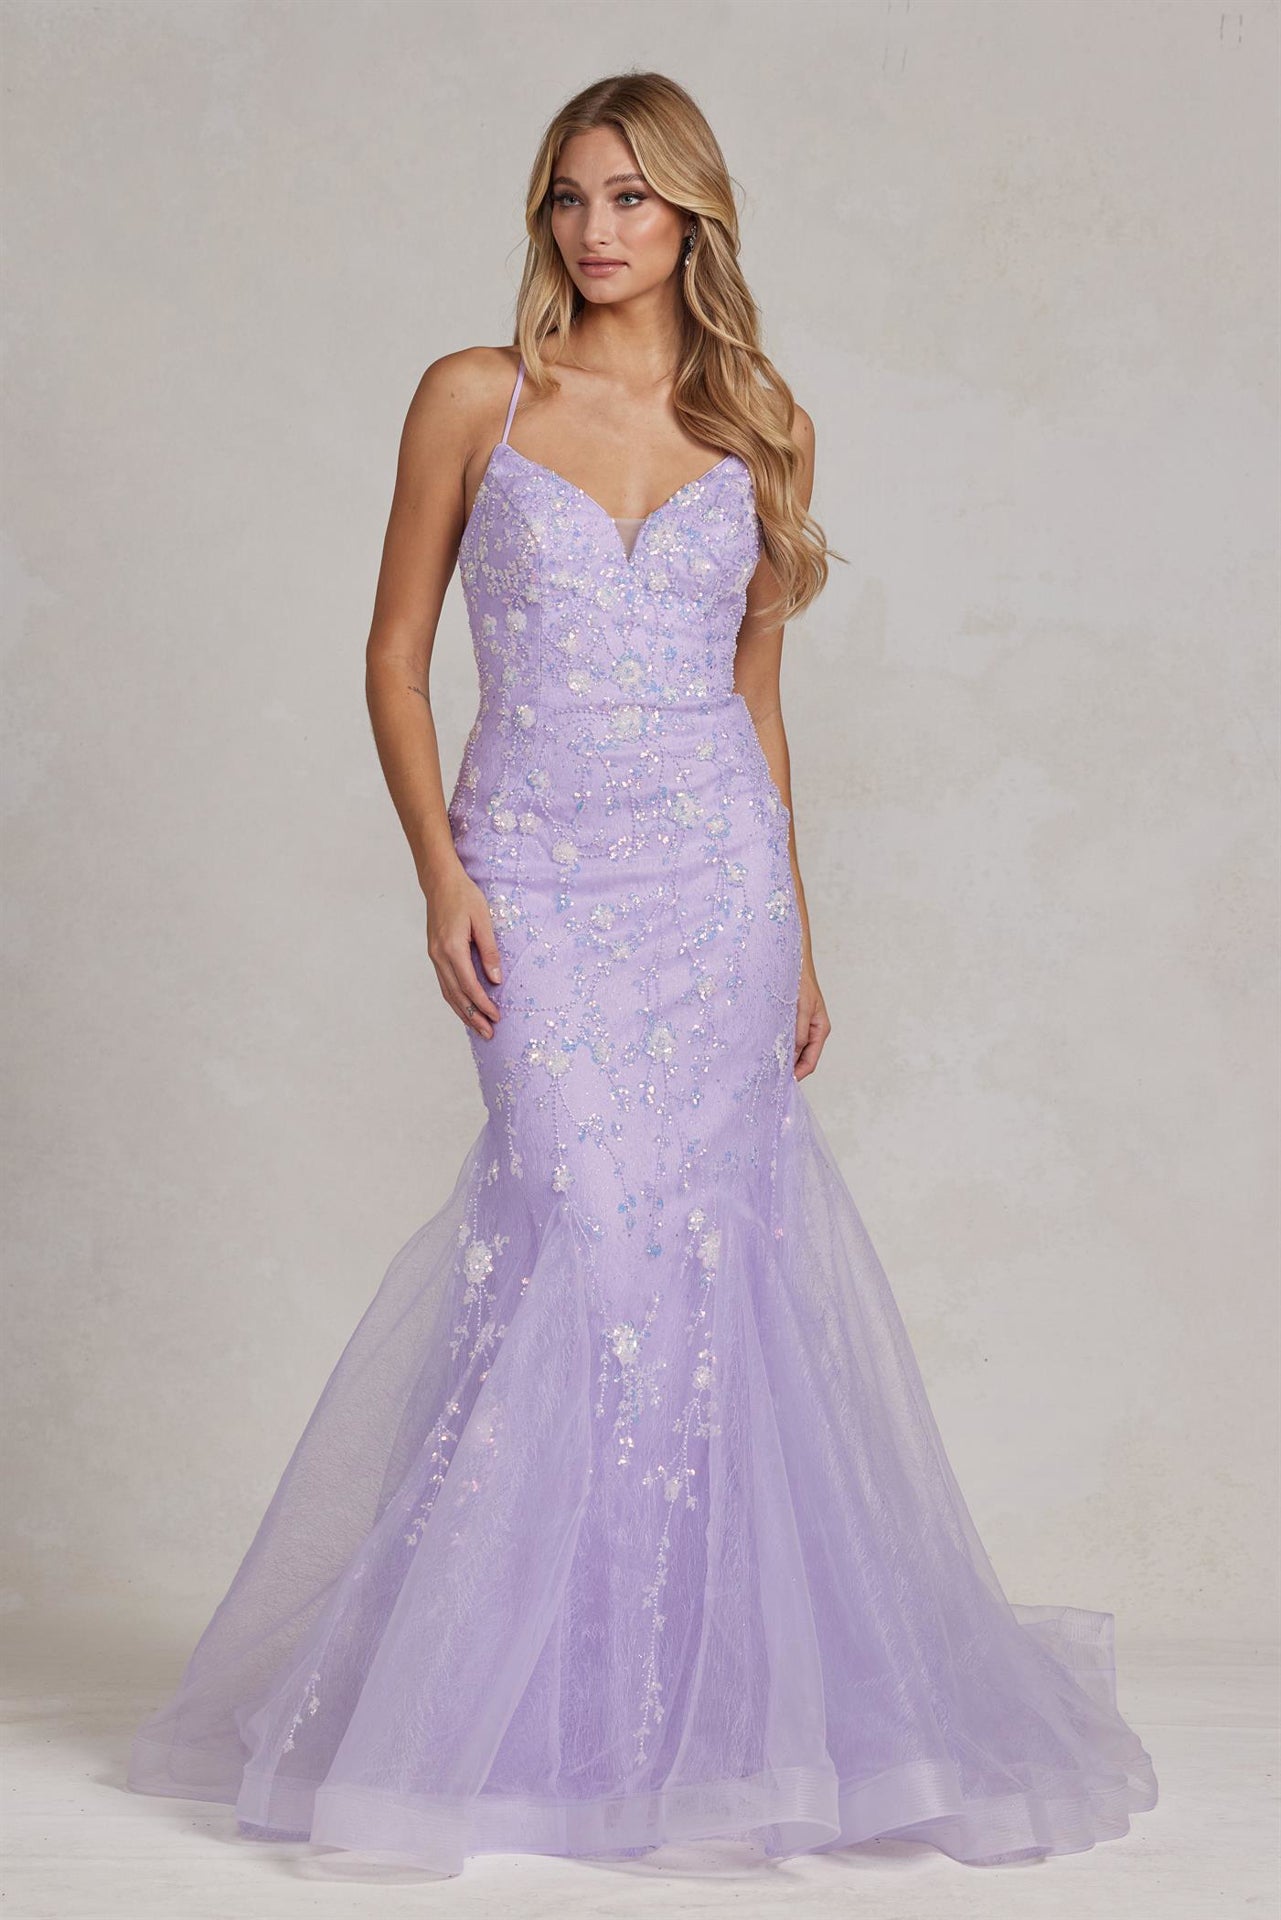 Mermaid Open Criss Cross Back Embroidered Flower Lace Long Prom Dress NXC1117-Prom Dress-smcfashion.com